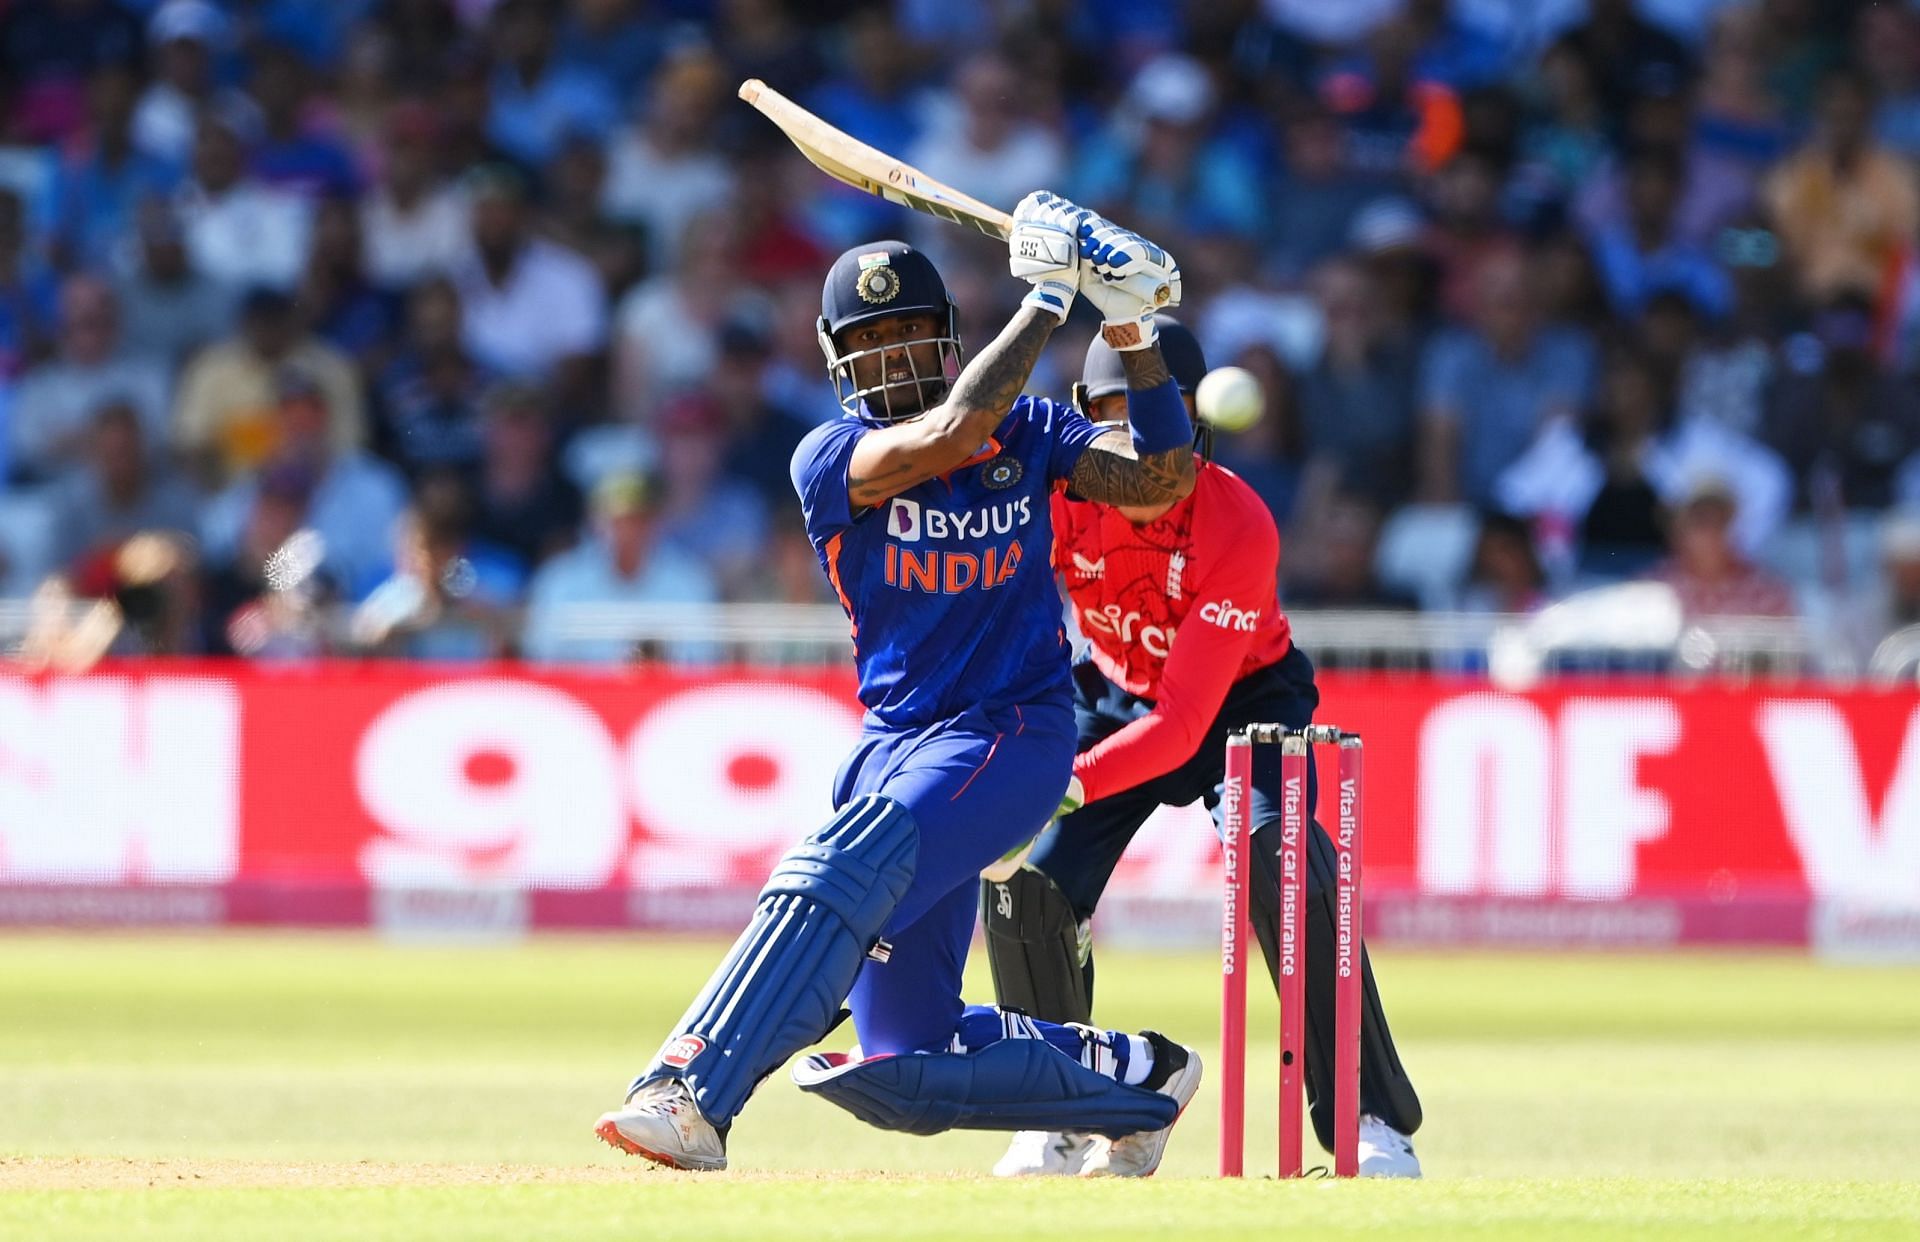 Suryakumar Yadav was almost like a lone warrior for India in the third T20I against England